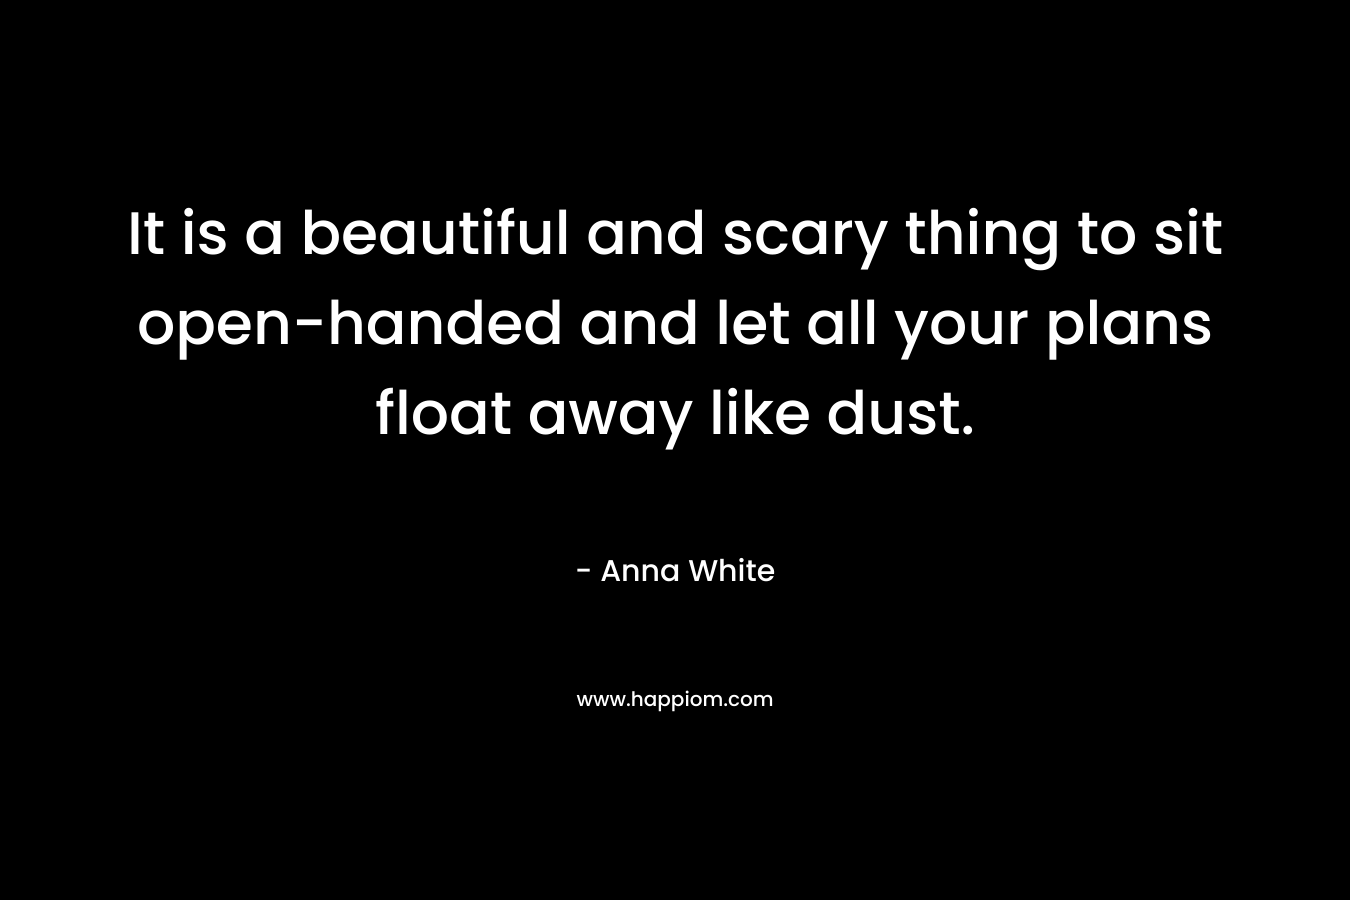 It is a beautiful and scary thing to sit open-handed and let all your plans float away like dust.